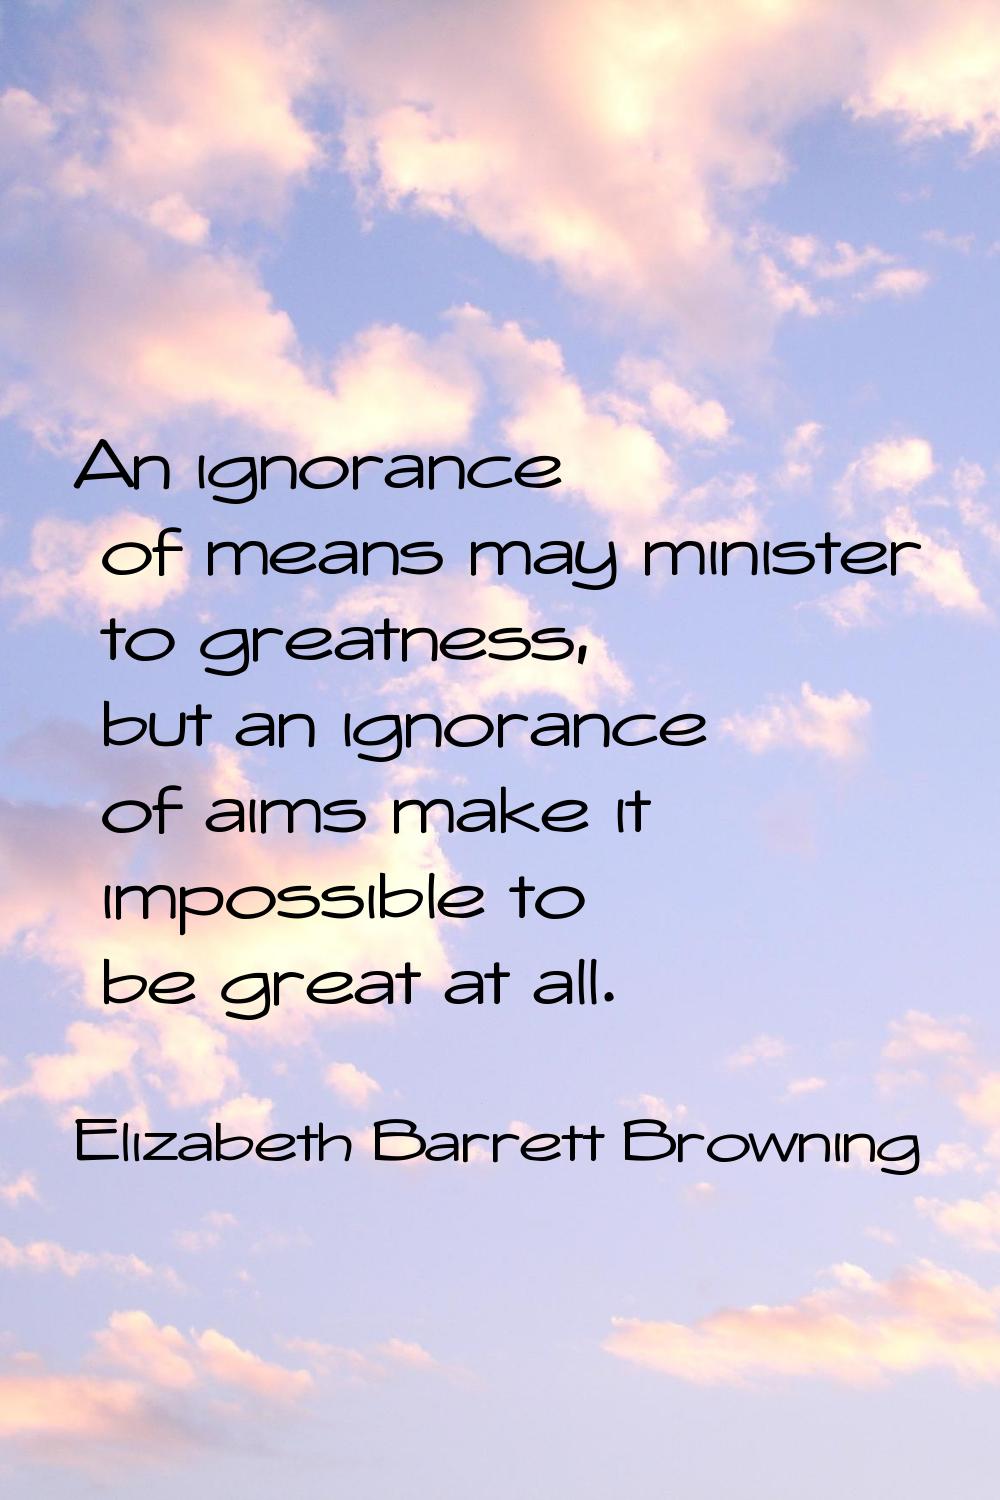 An ignorance of means may minister to greatness, but an ignorance of aims make it impossible to be 